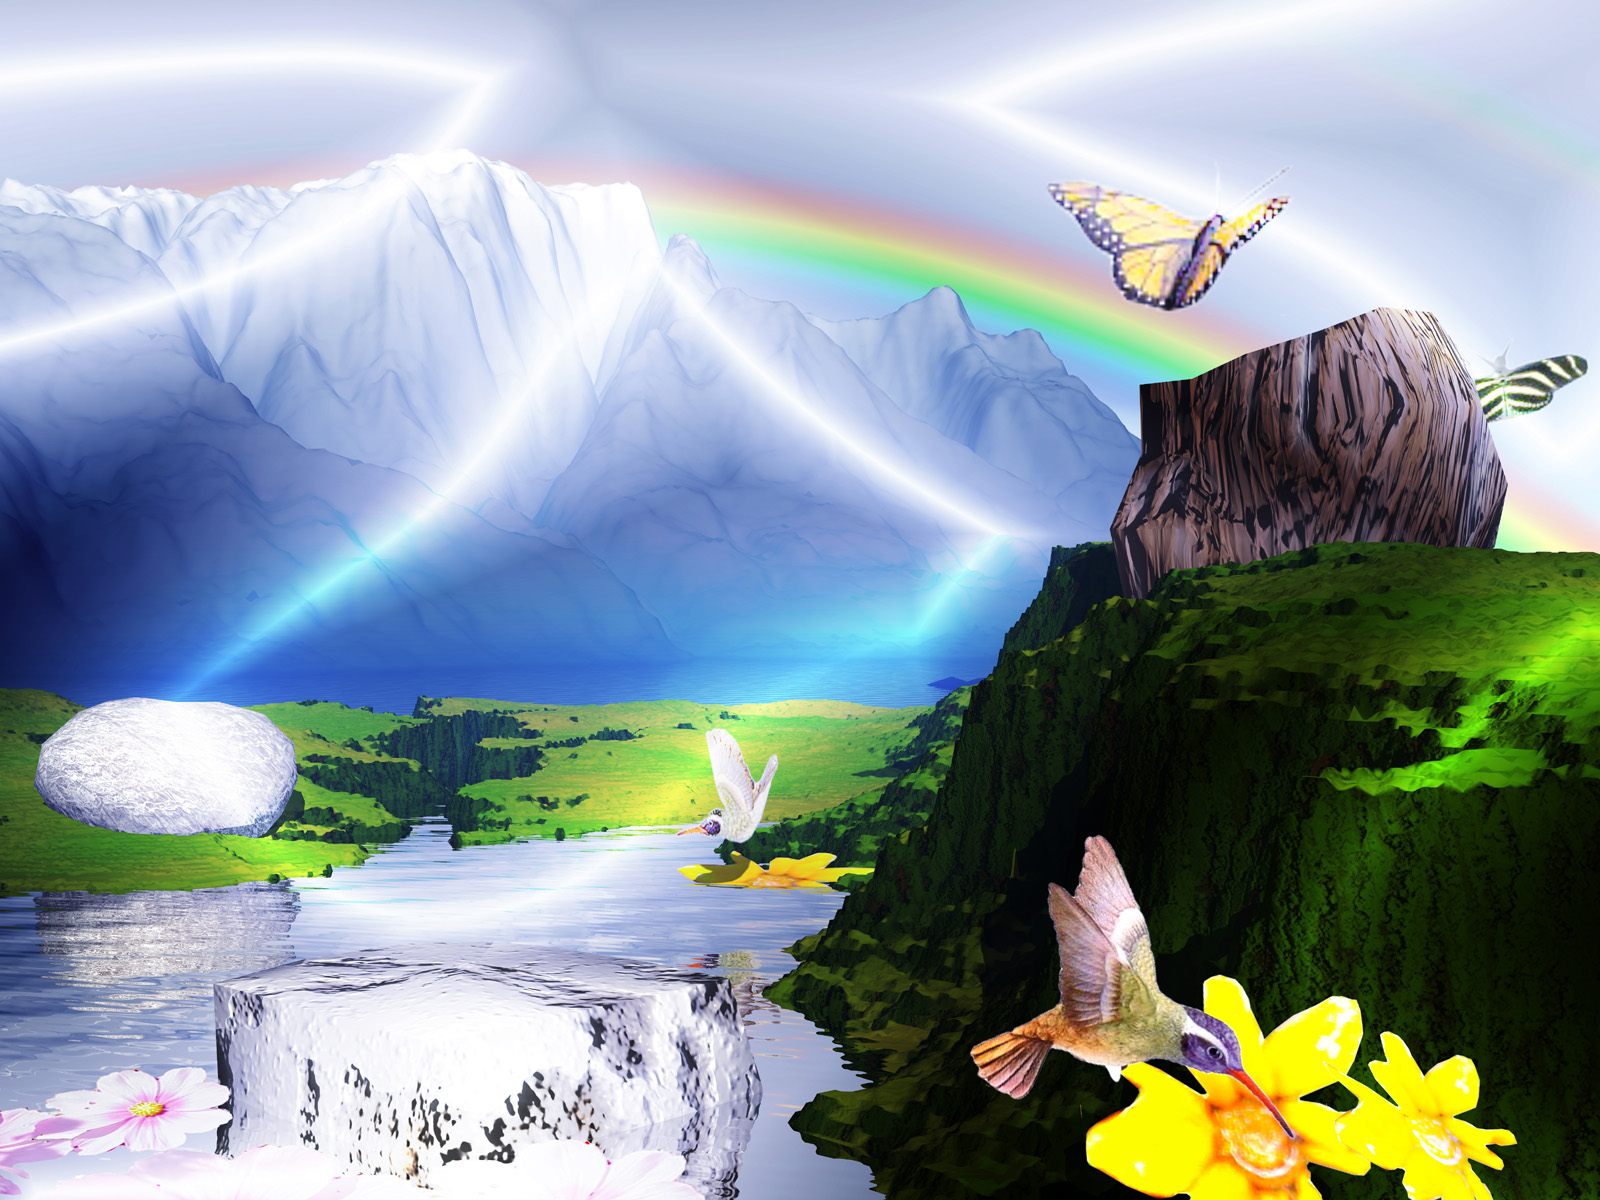 Wallpaper 3d, Wallpapers, 3d Awesome Wallpapers, 3d - Paisaje Hermoso Imágenes Cristianas - HD Wallpaper 